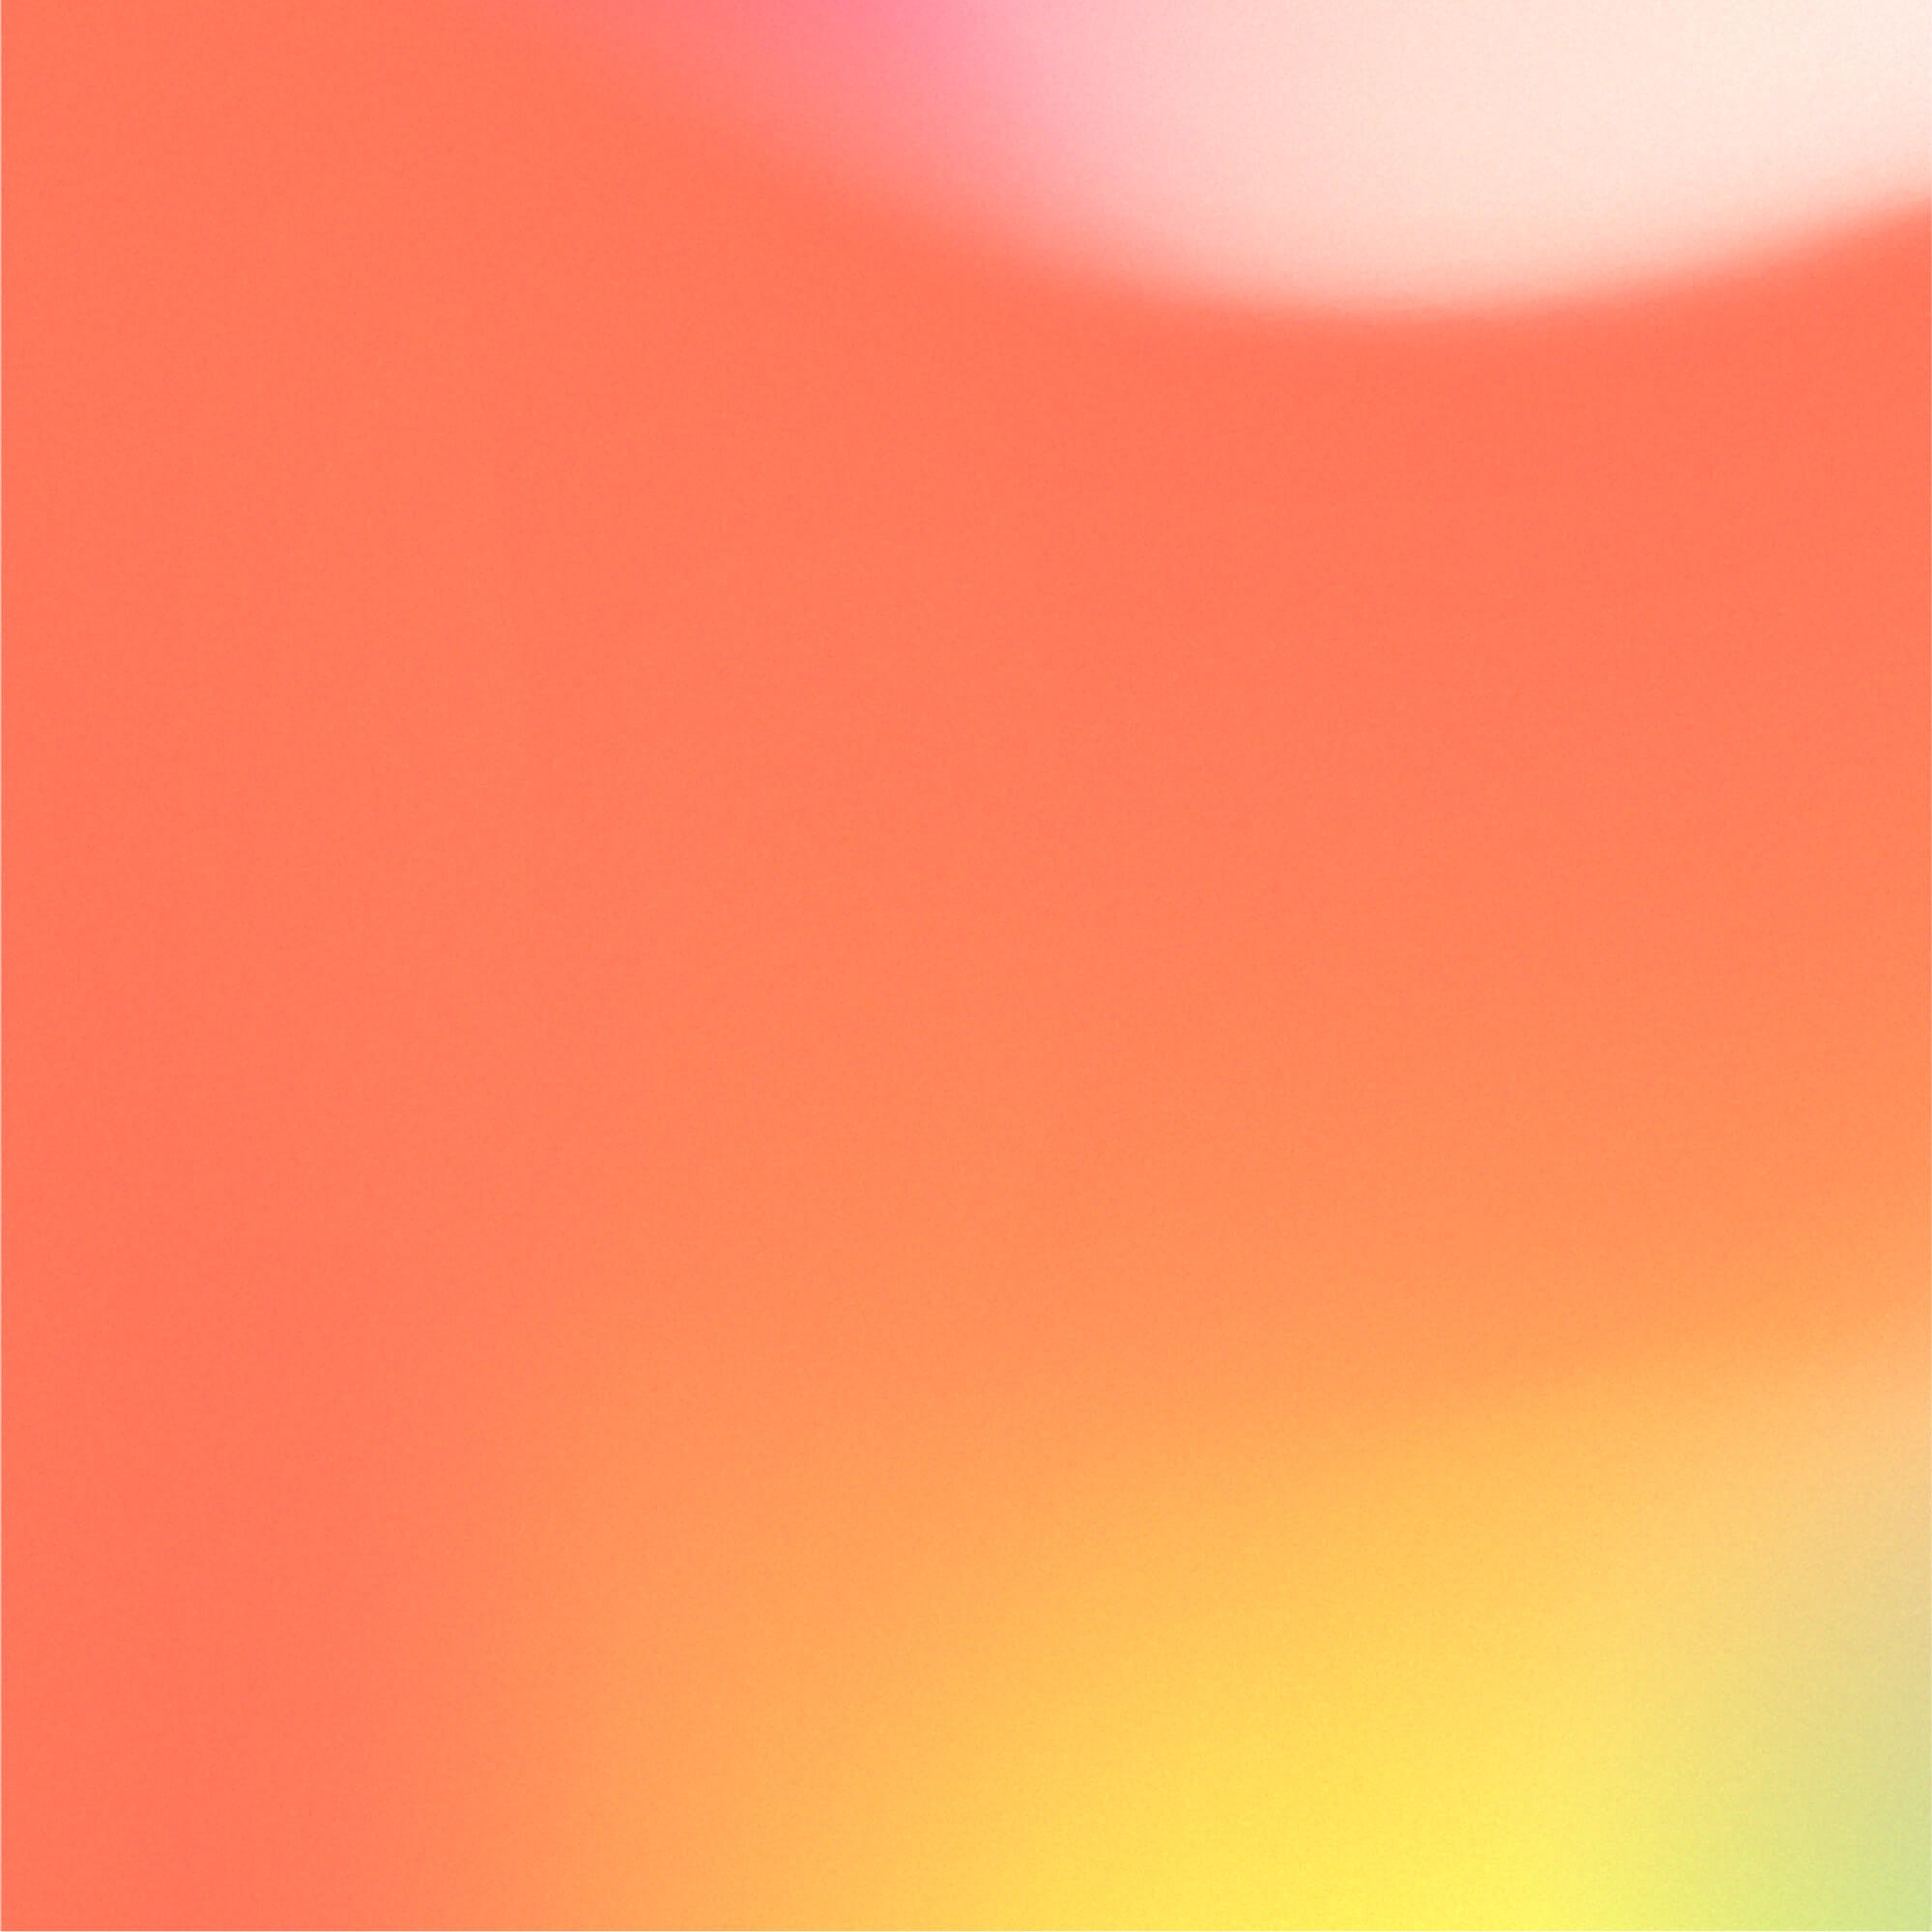 A colorful gradient of orange, yellow, and peach.